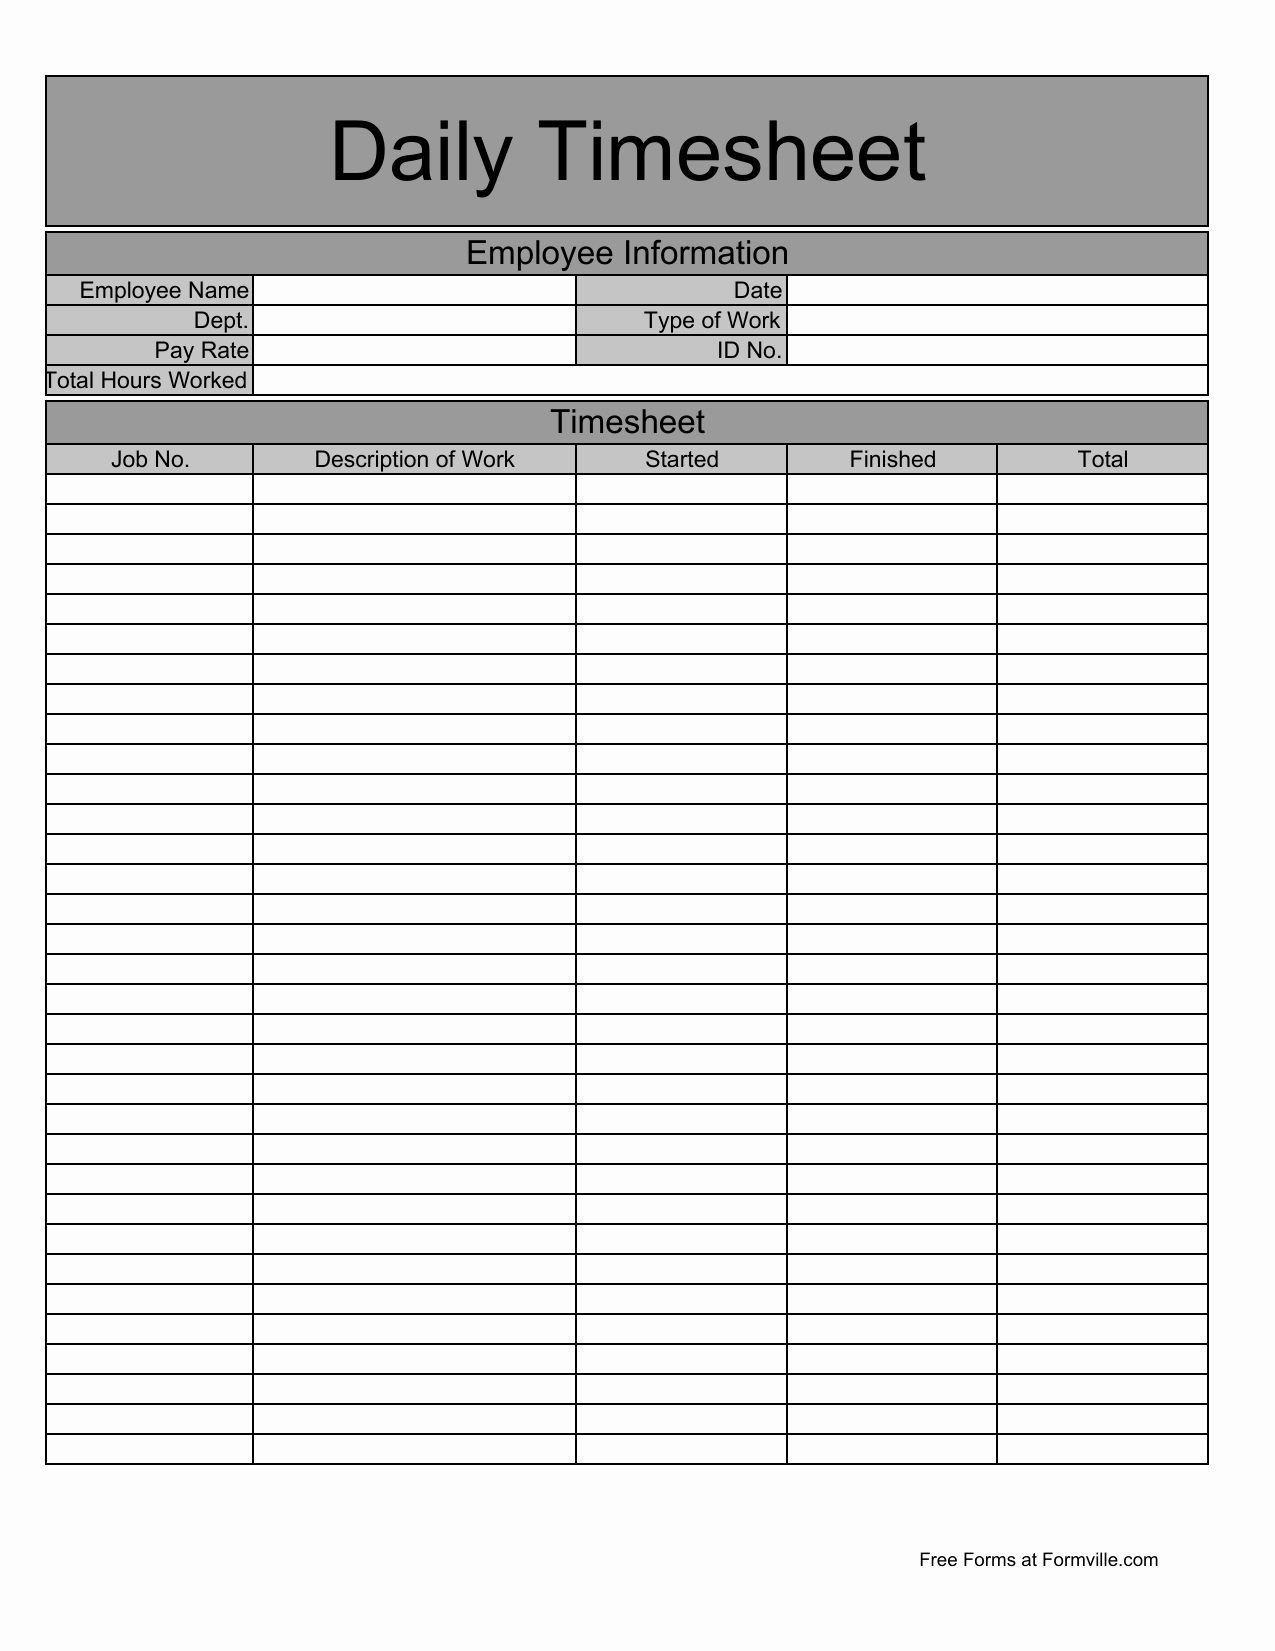 Daily Timesheet Excel Template Luxury Download Daily Timesheet Template Excel Pdf